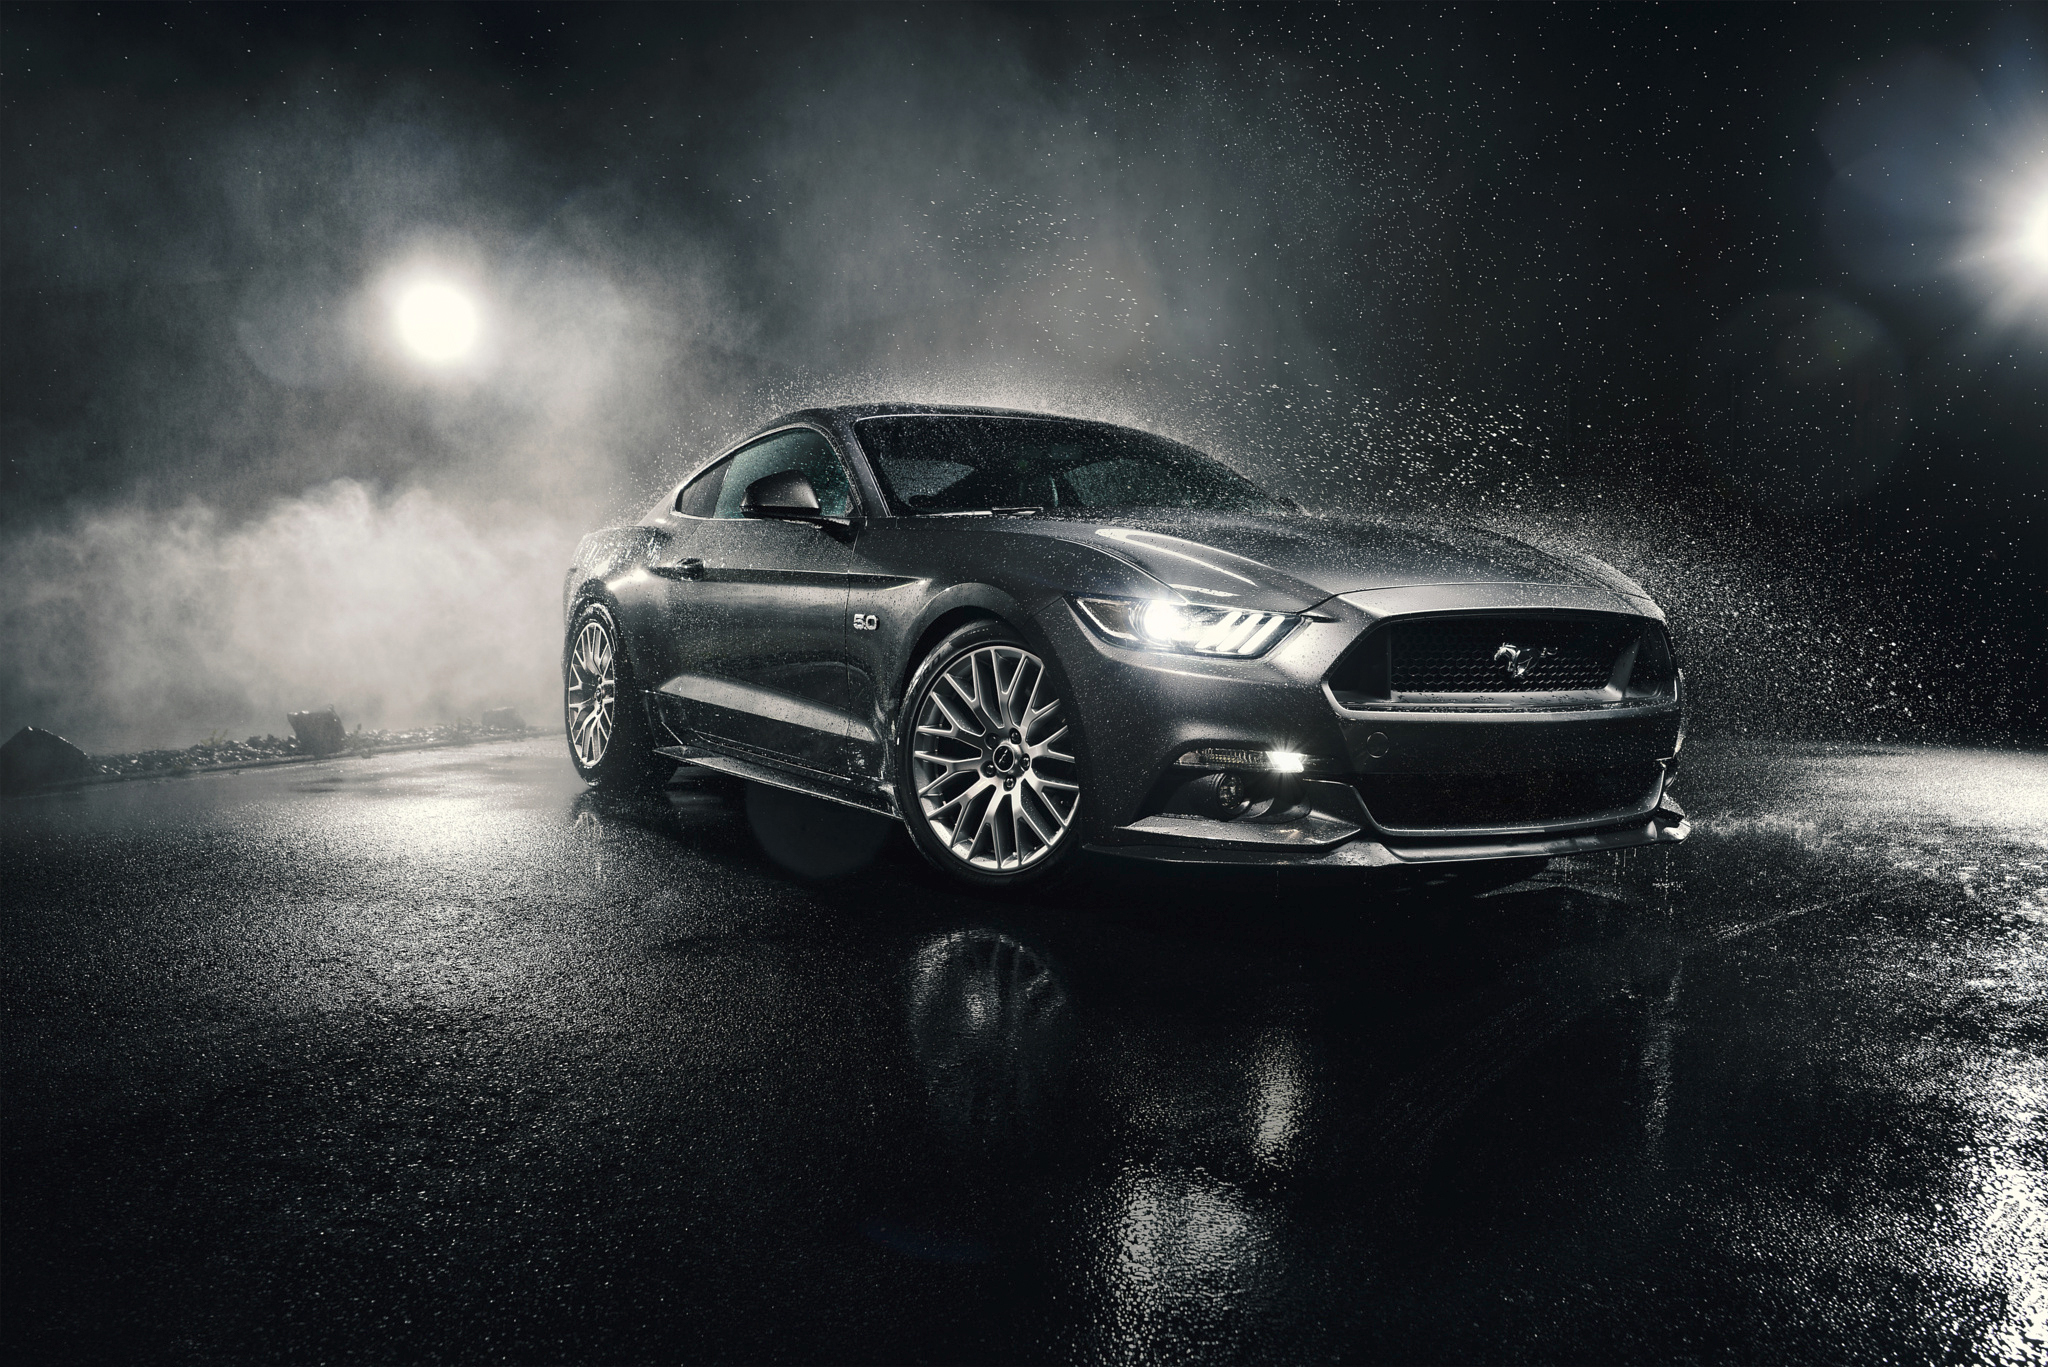 Ford Mustang Gt Wallpapers